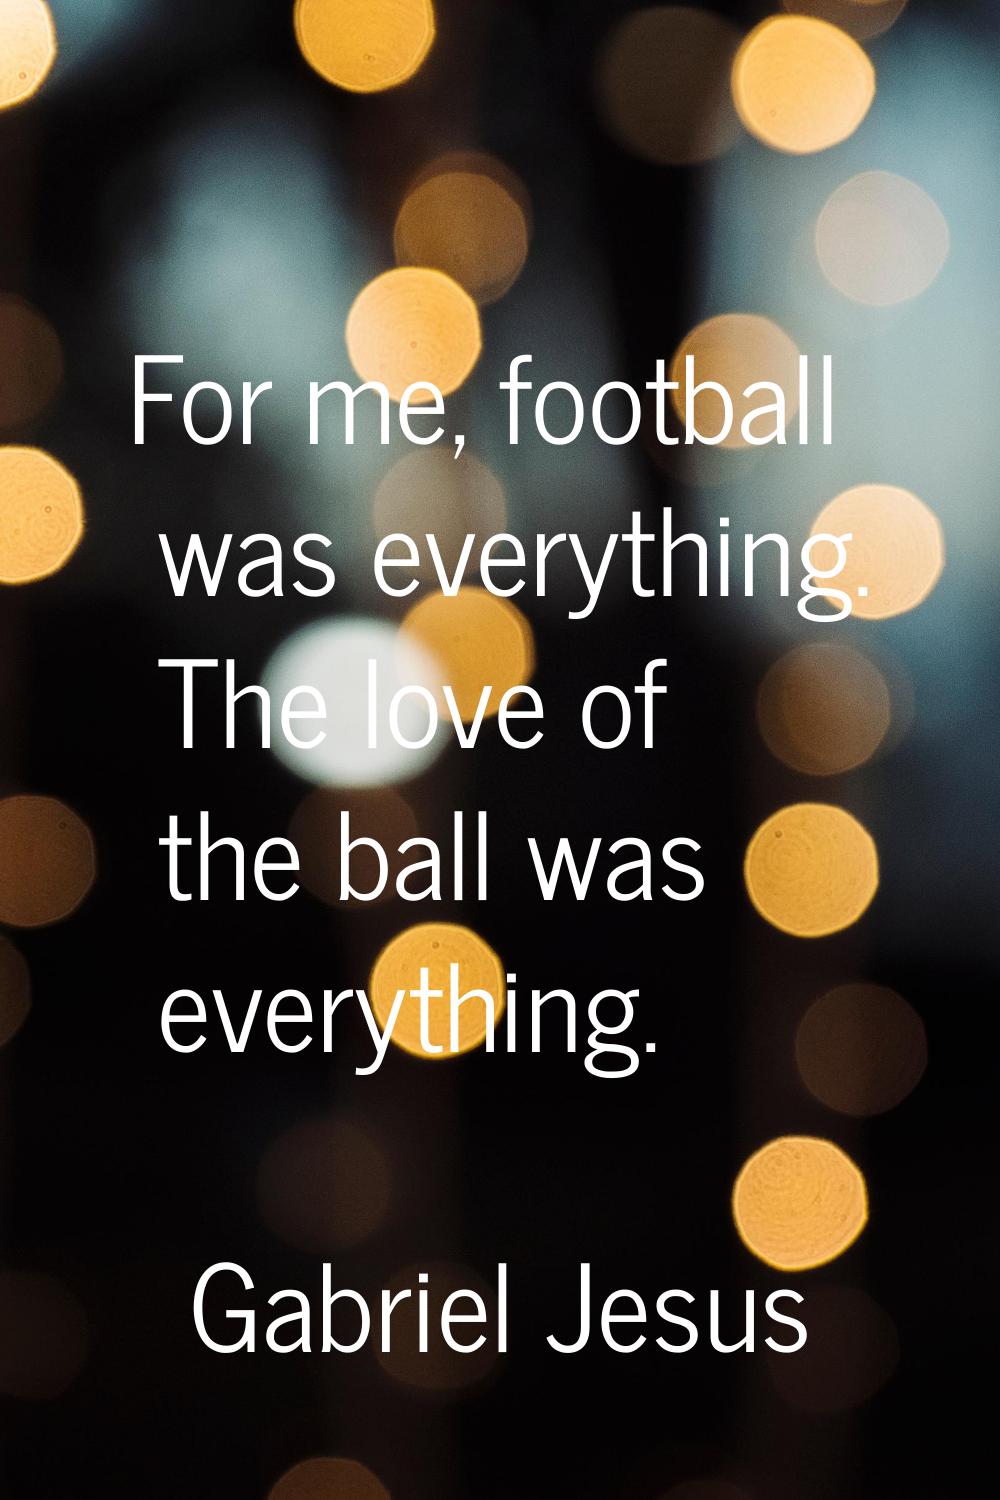 For me, football was everything. The love of the ball was everything.